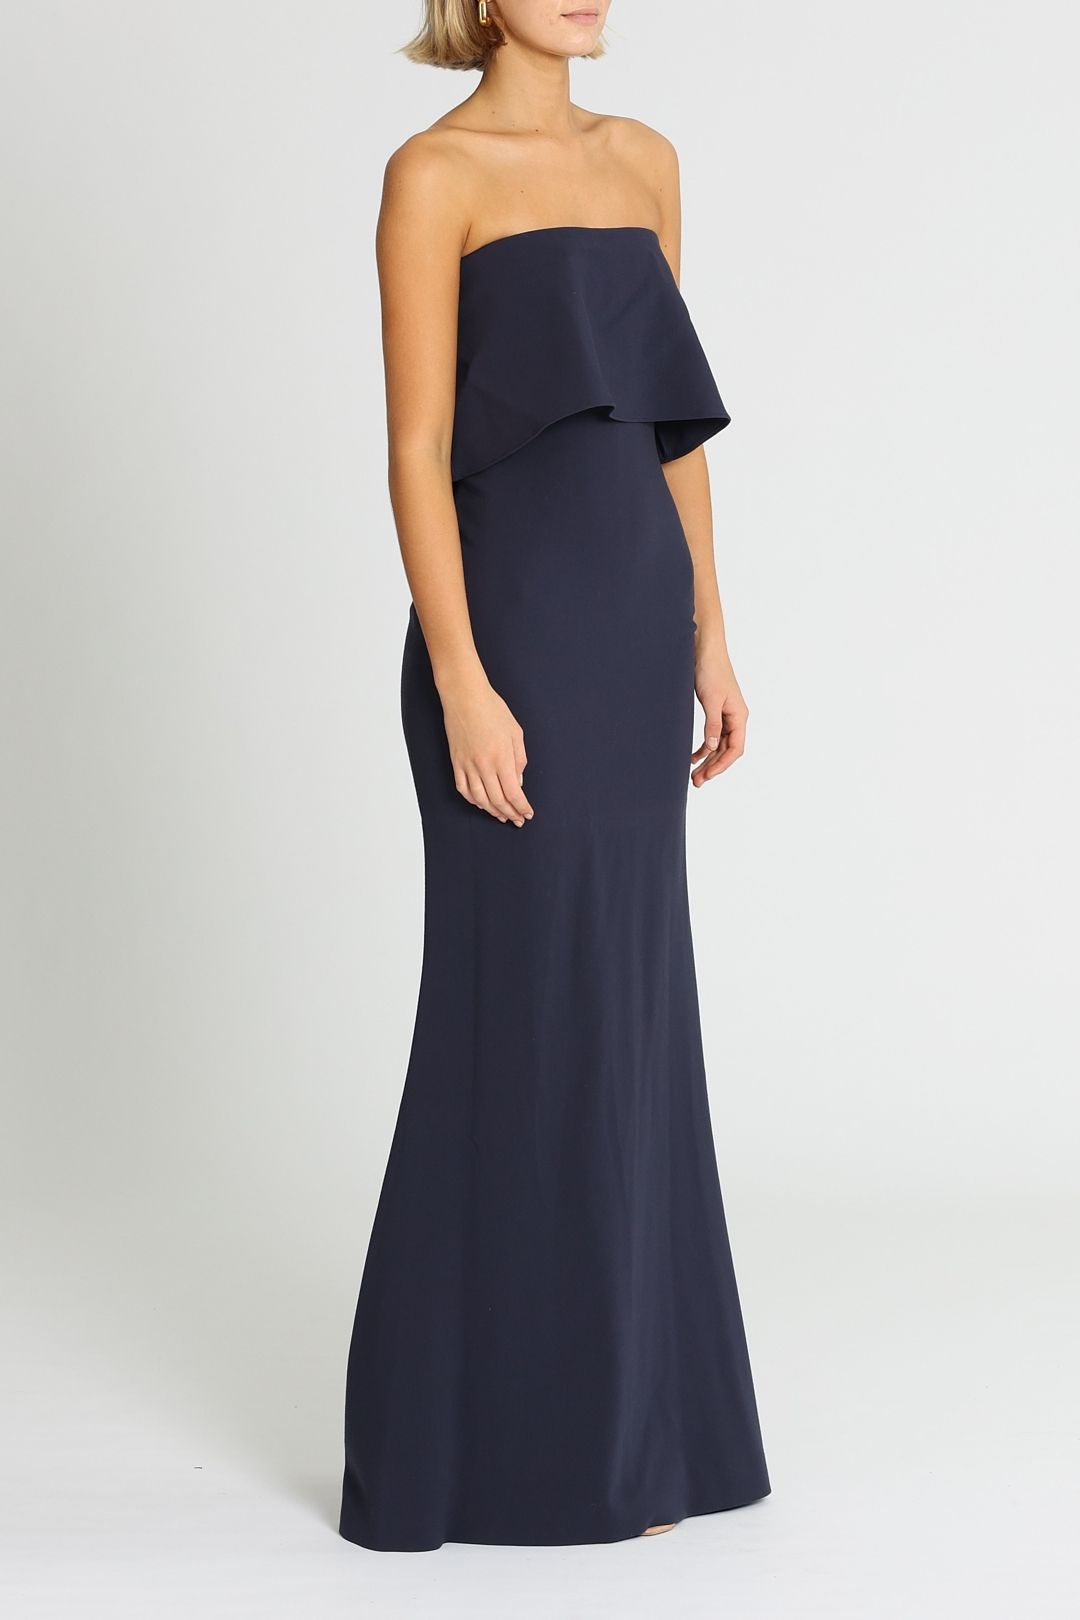 Likely NYC Driggs Gown Navy Strapless